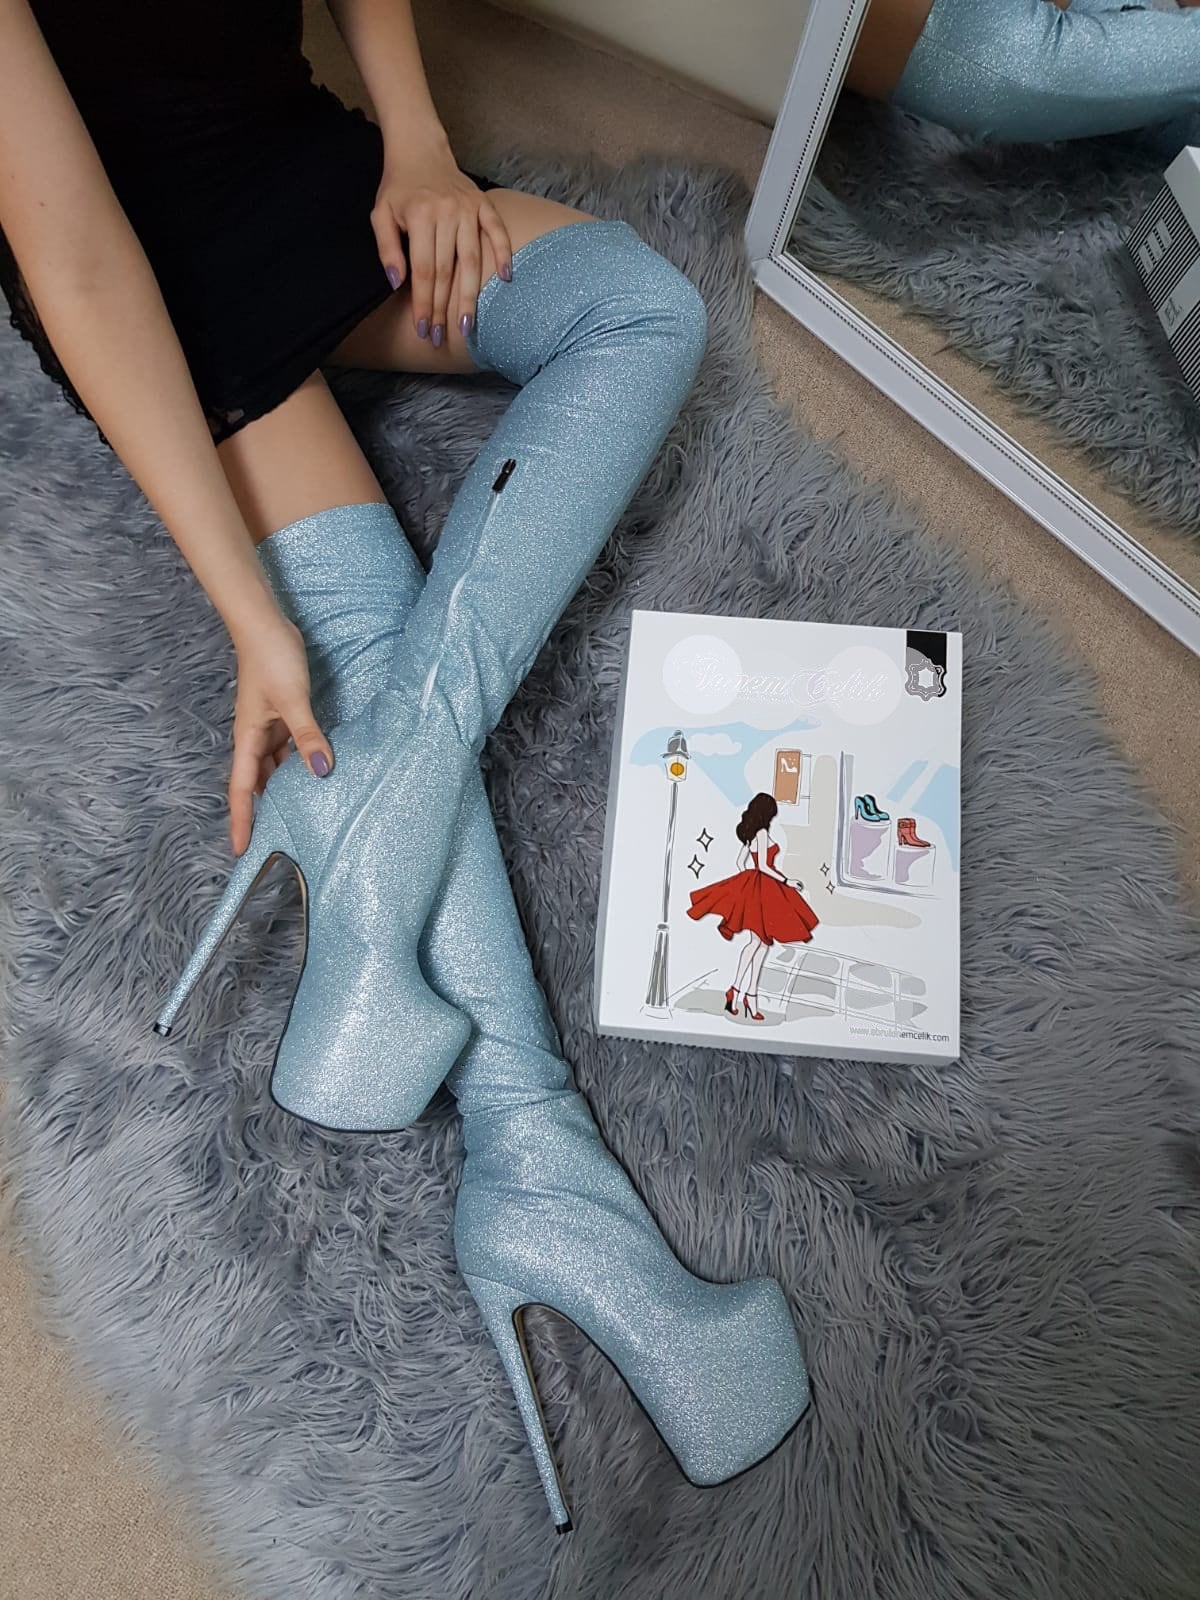 Over the Knee Boots Baby Blue Boot Night Over the Knee | Etsy